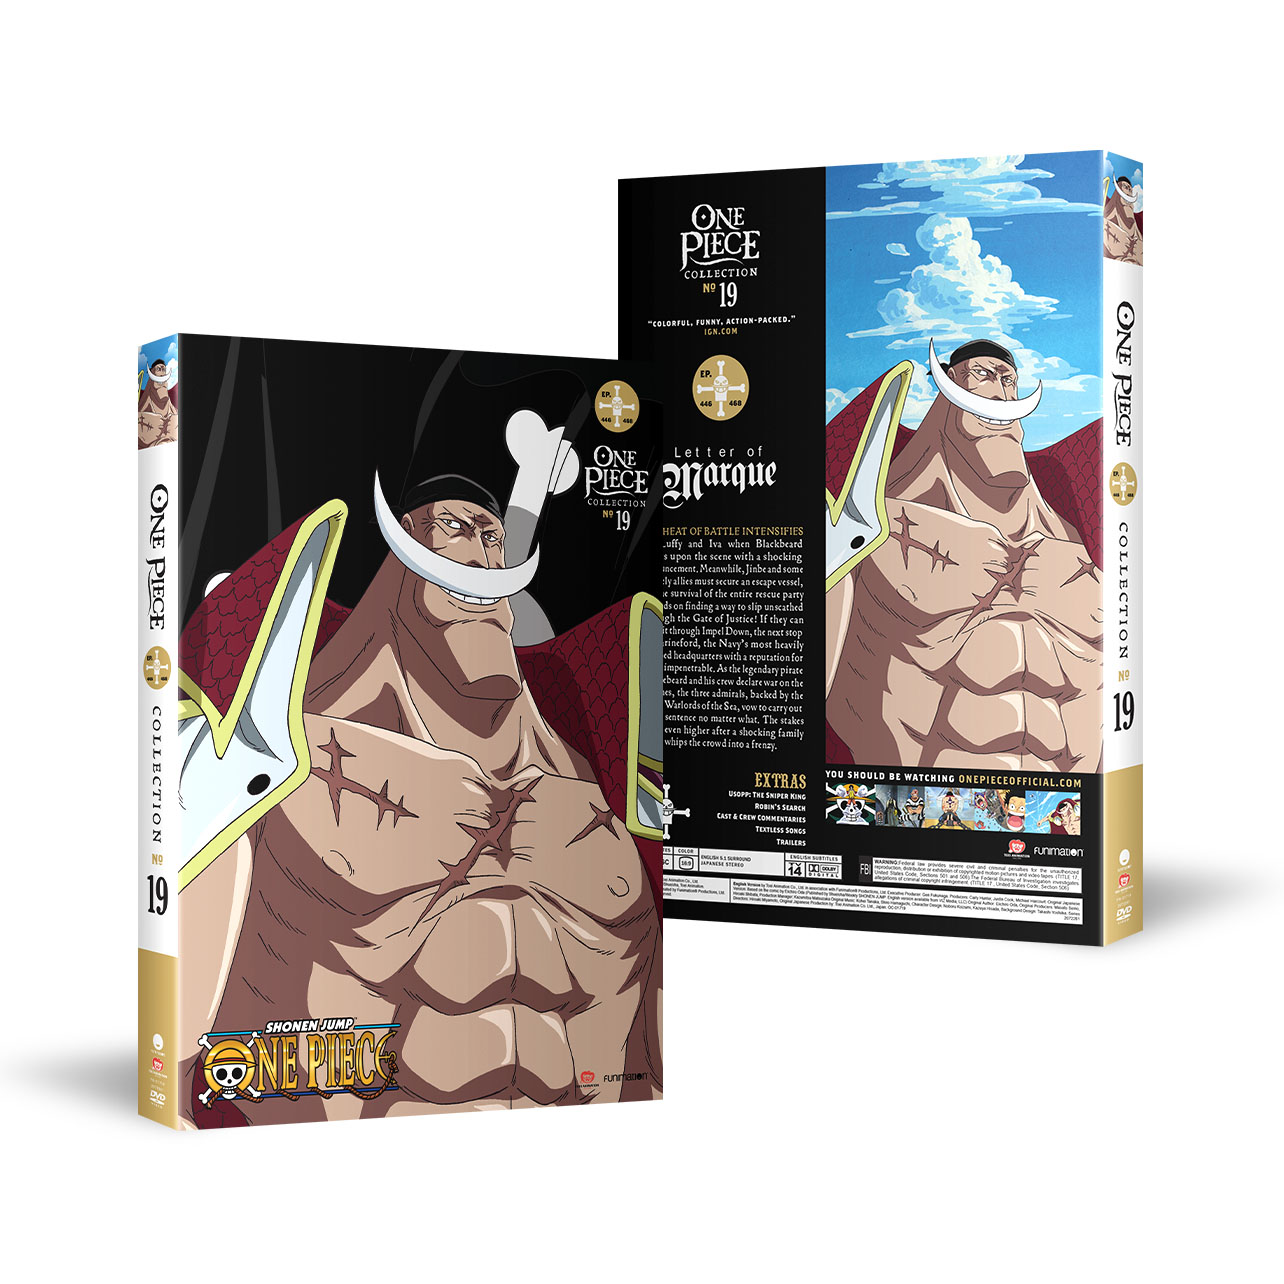 One Piece - Collection 19 - DVD image count 0